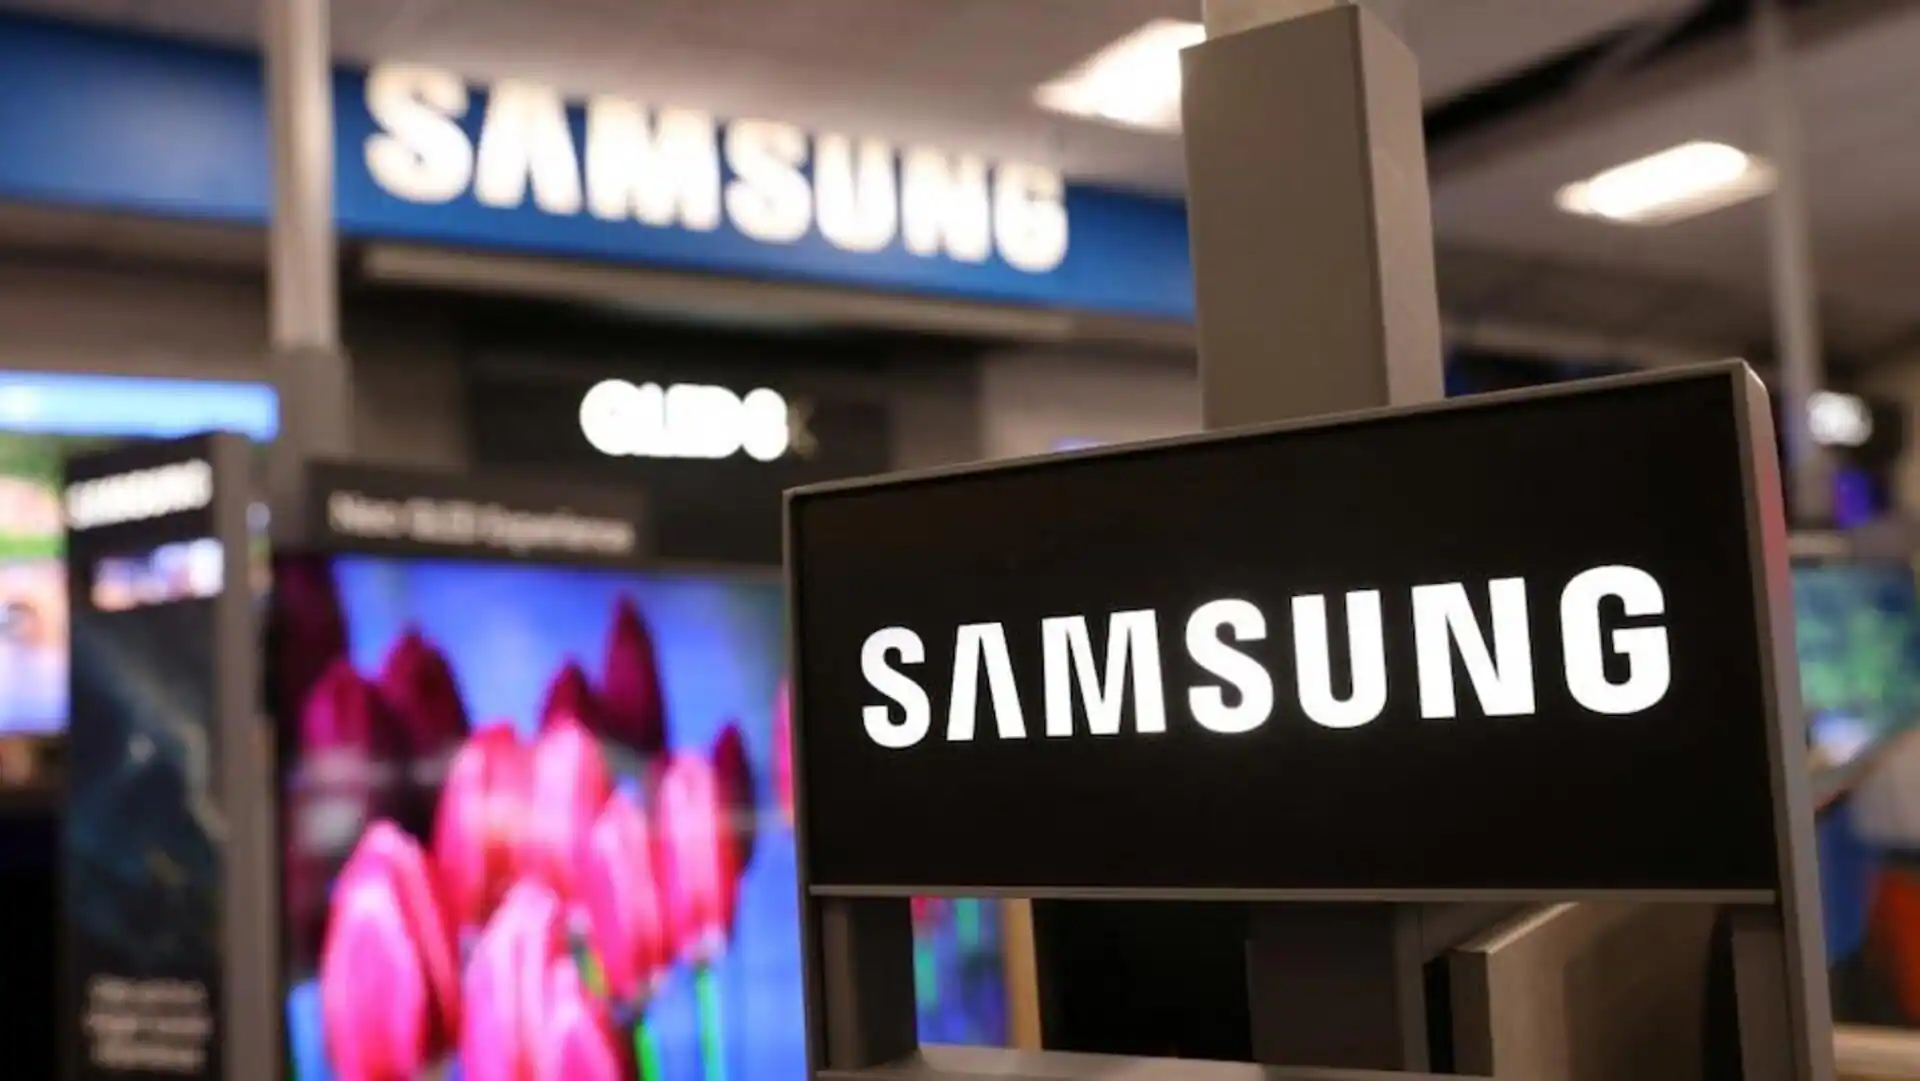 Samsung's Mega Move How a $7 Billion Texas Chip Factory Plans to Power Up Our Tech Future--